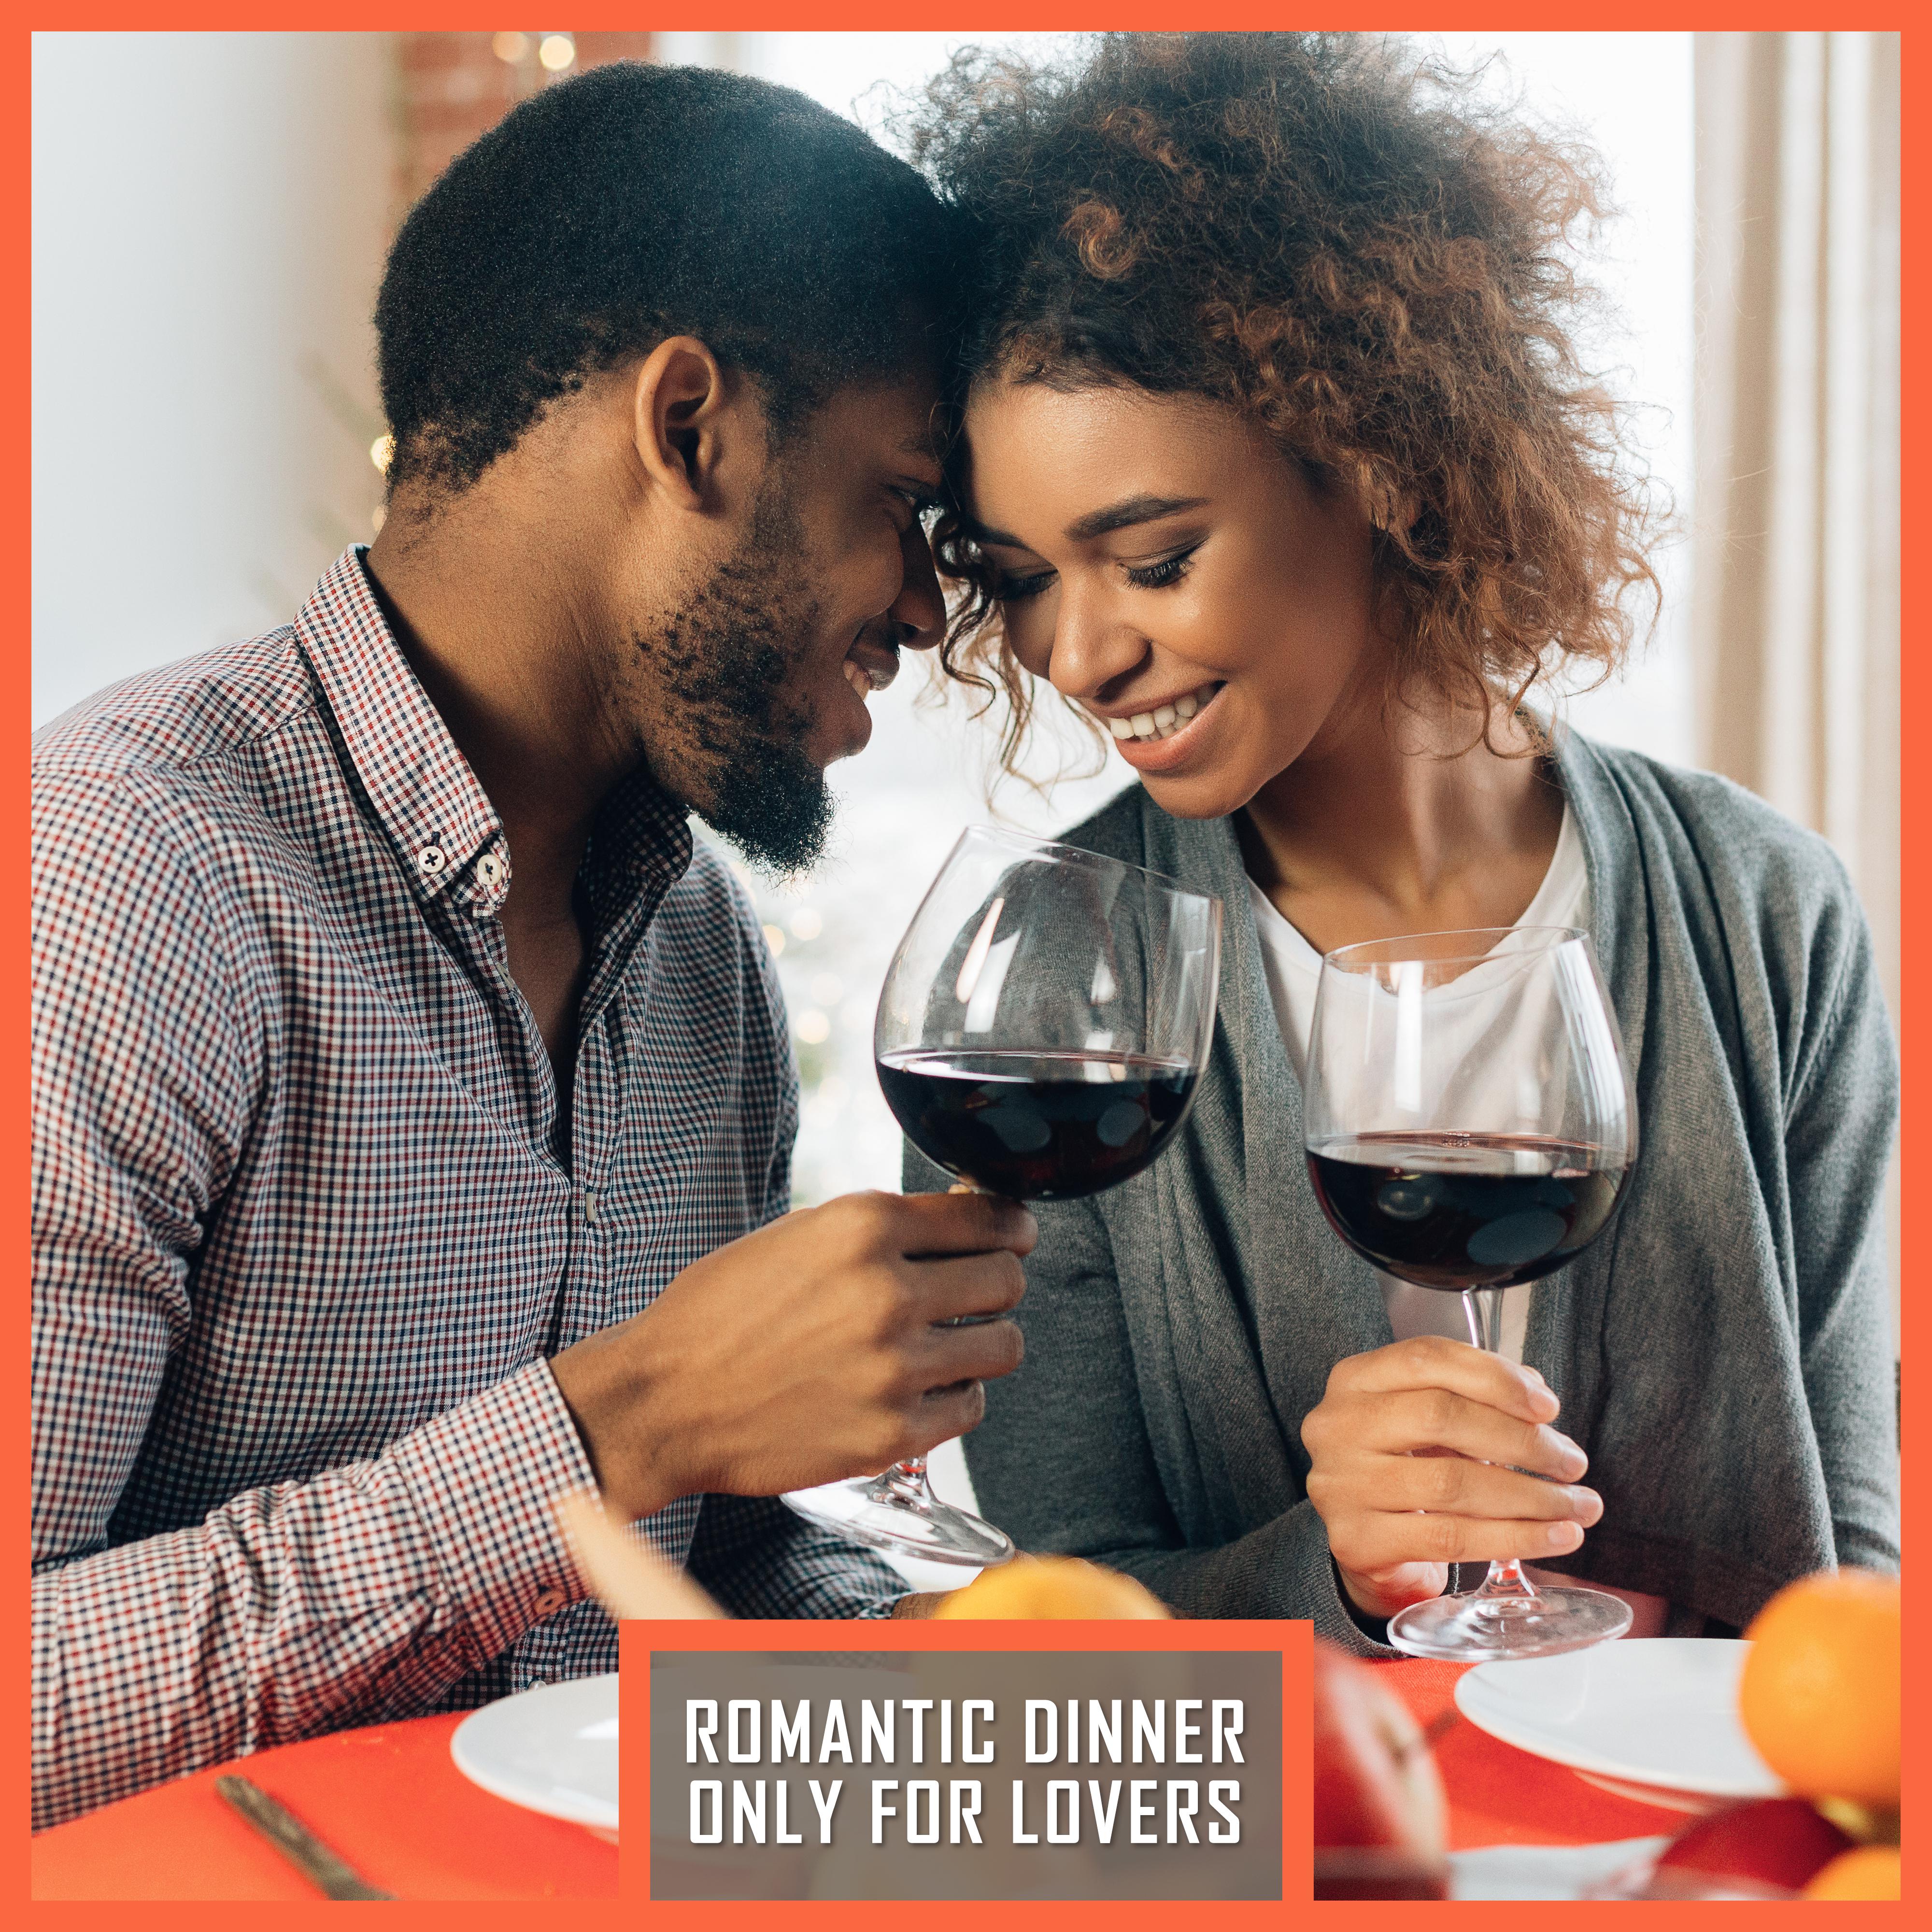 Romantic Dinner Only for Lovers: 2019 Compilation of Sweet Smooth Jazz Songs for Romantic Time Together in Restaurant, Good Food & Wine Testing, Candle Light